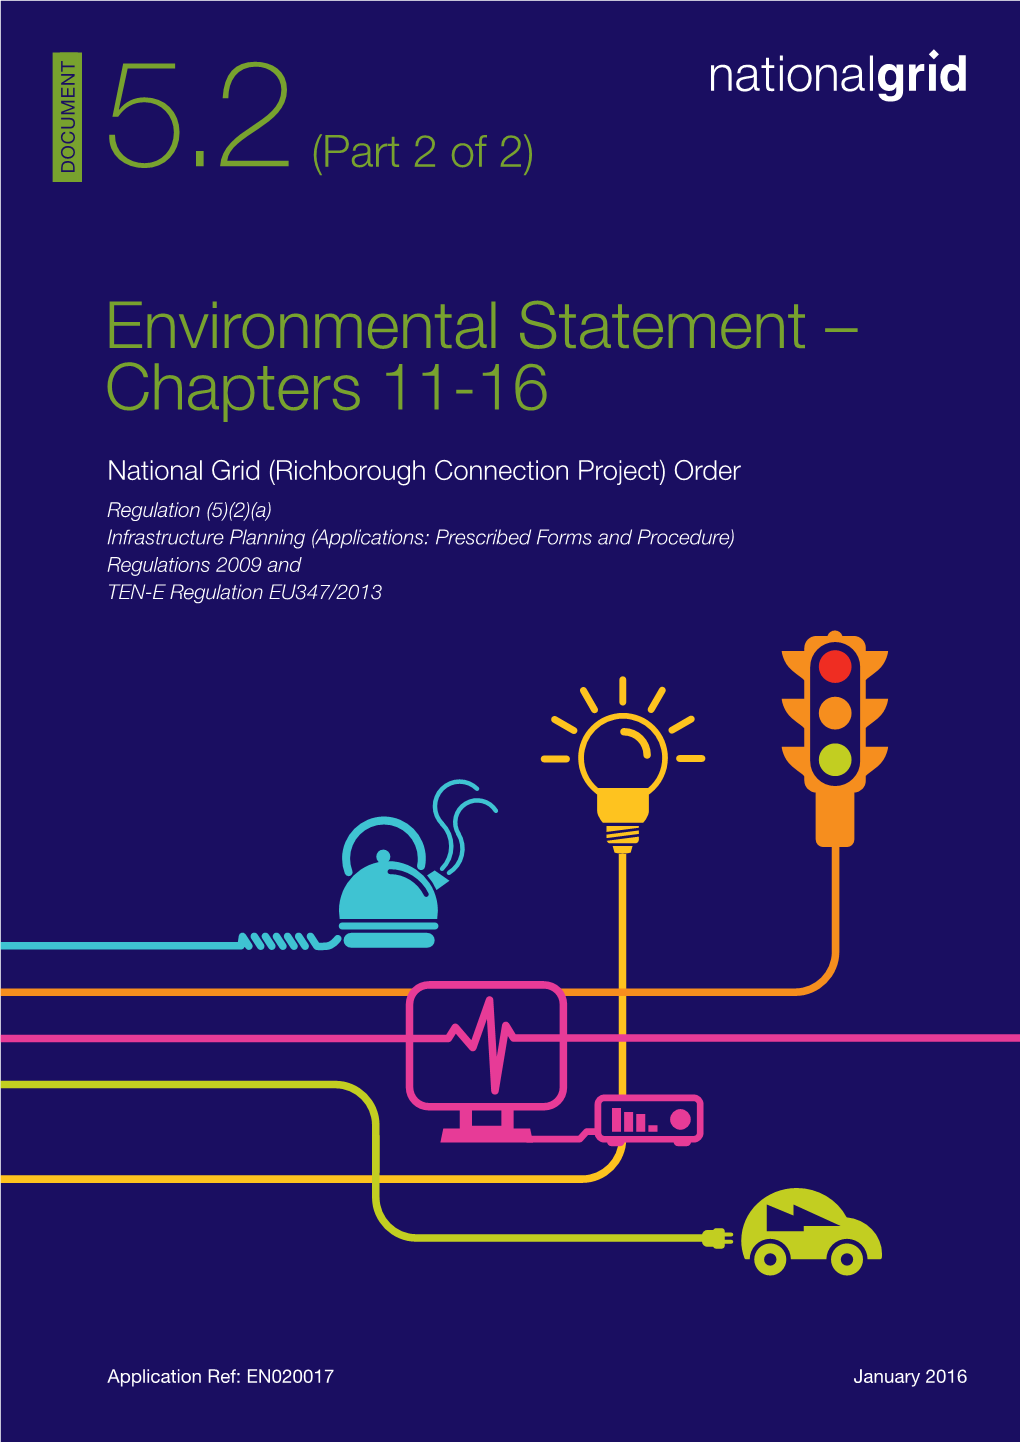 Environmental Statement – Chapters 11-16